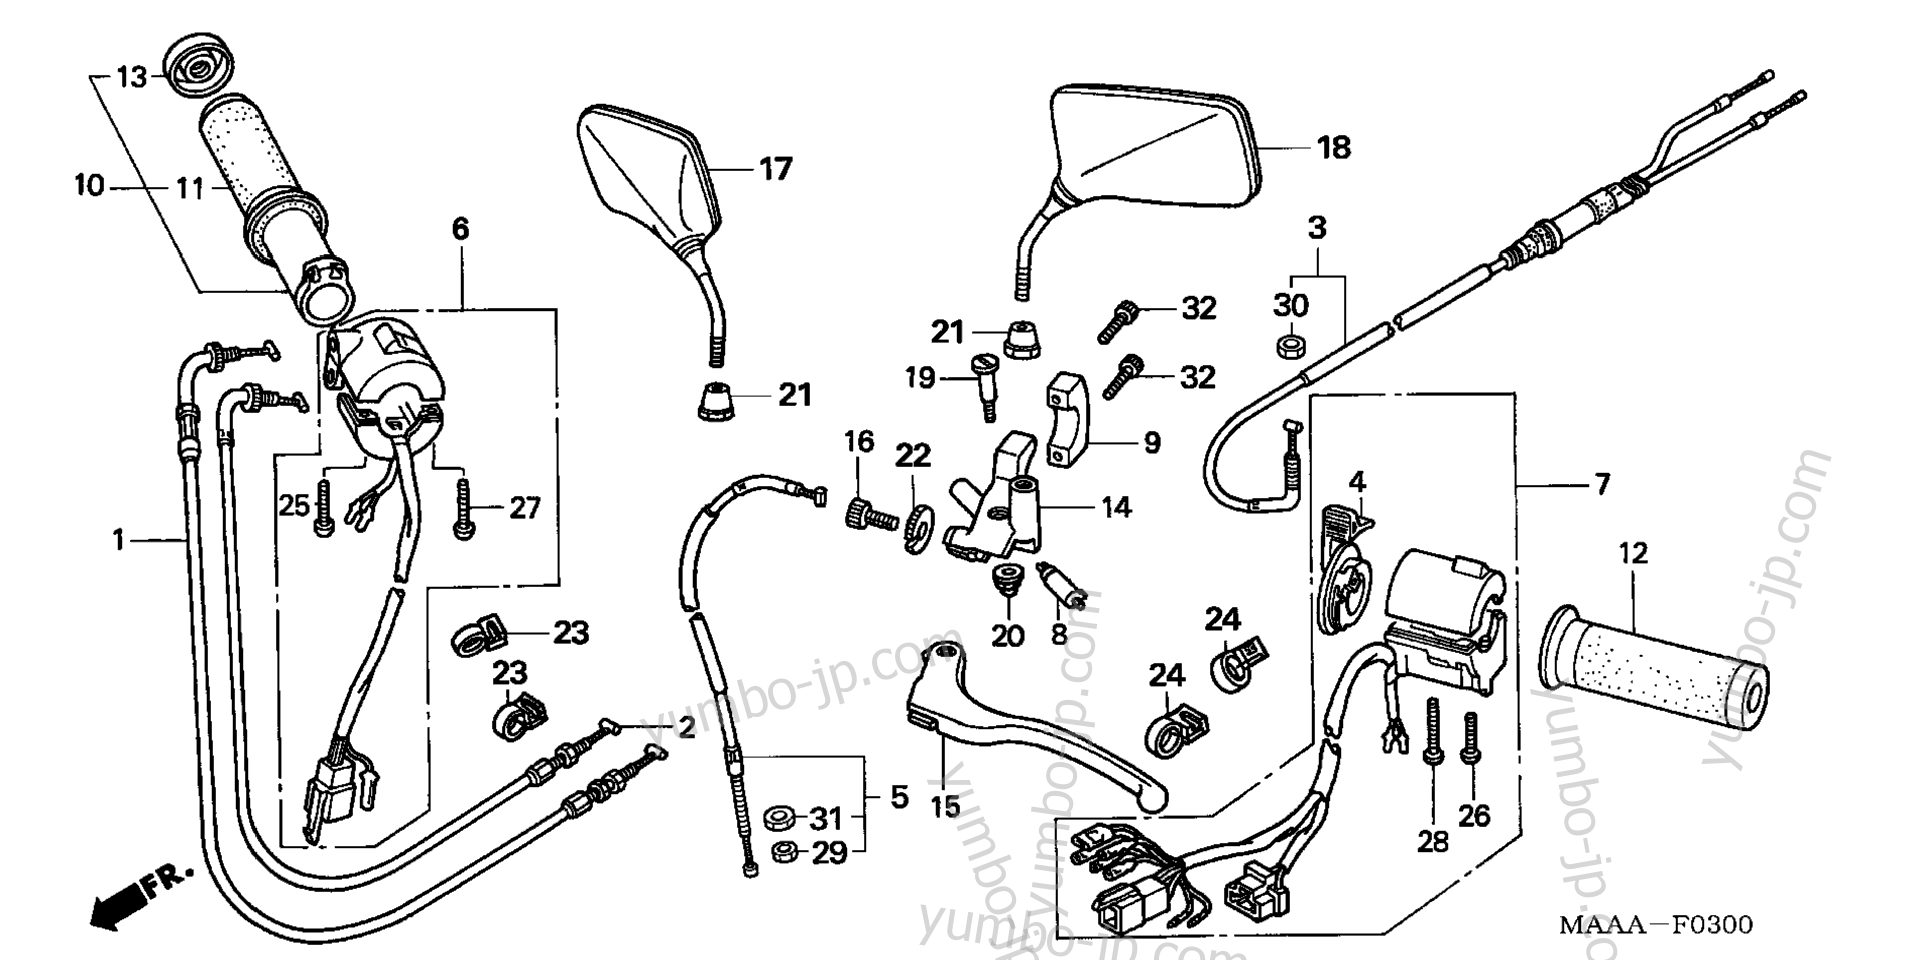 HANDLE LEVER / SWITCH / CABLE for motorcycles HONDA VT1100C A 2007 year